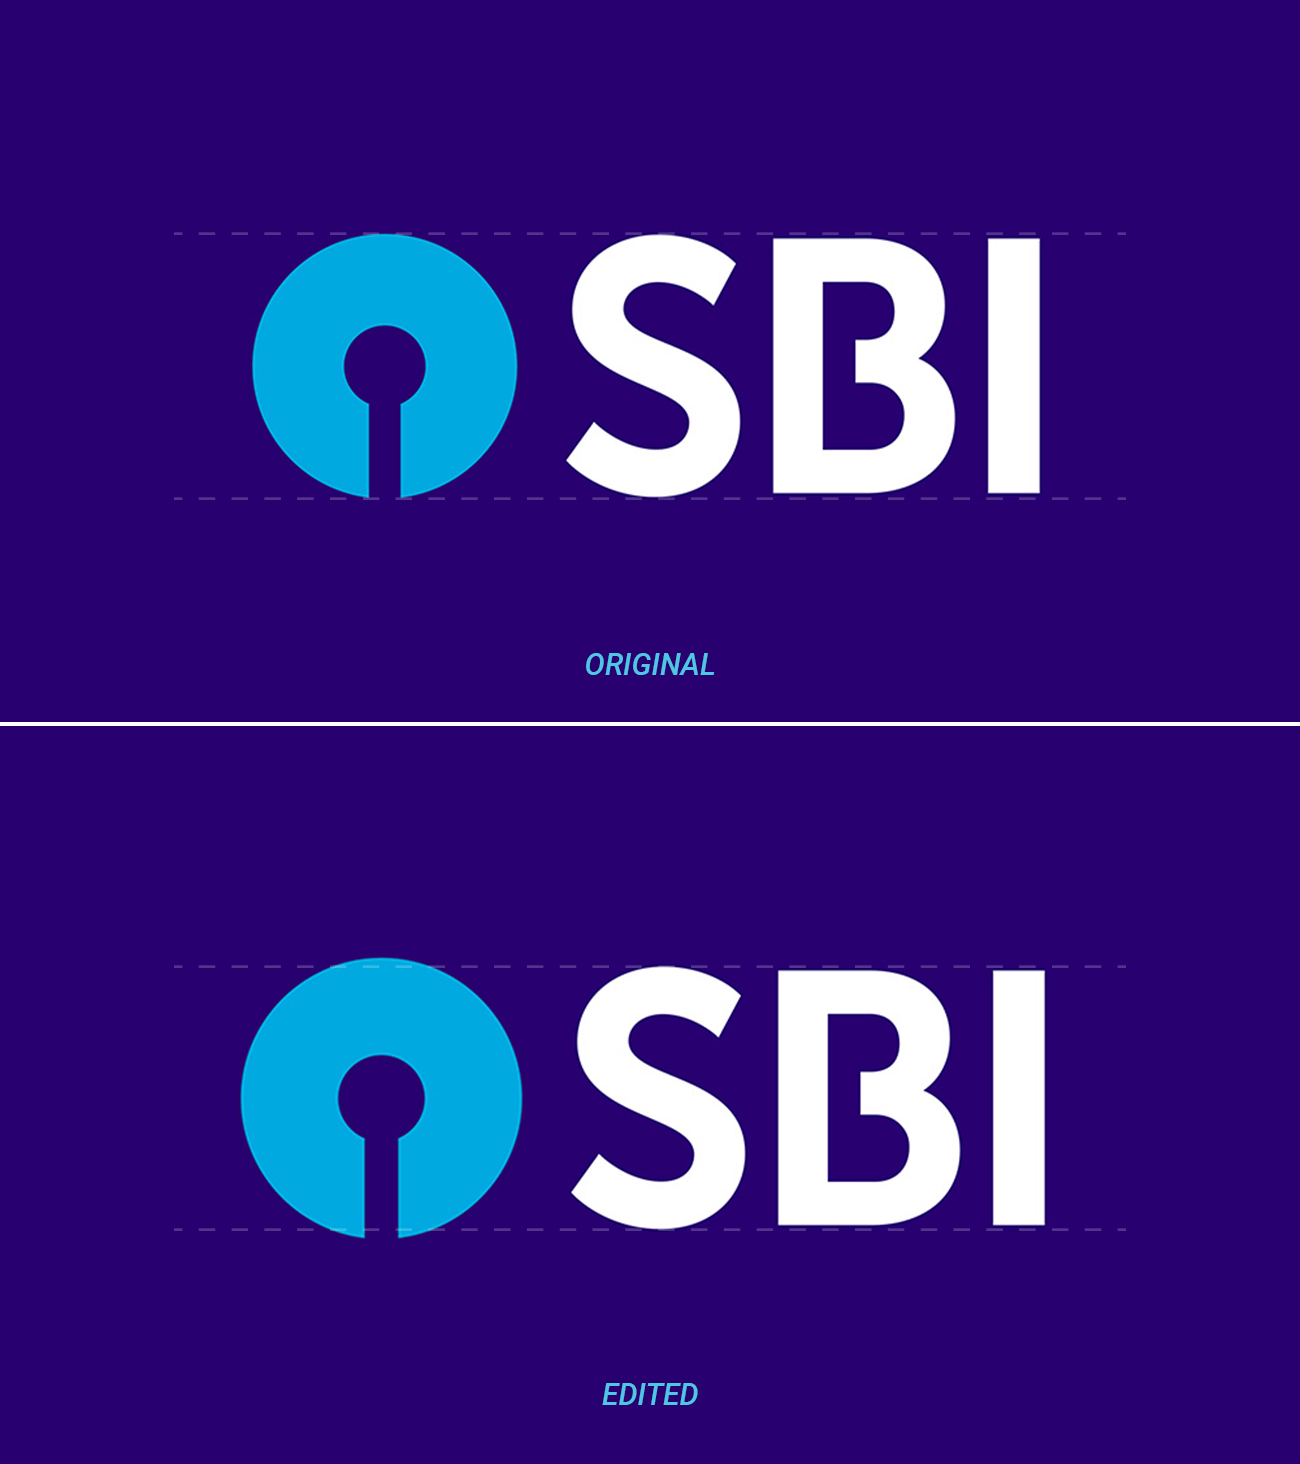 SBI Logo - icon - Does optical correction give a more aesthetic look to the SBI ...